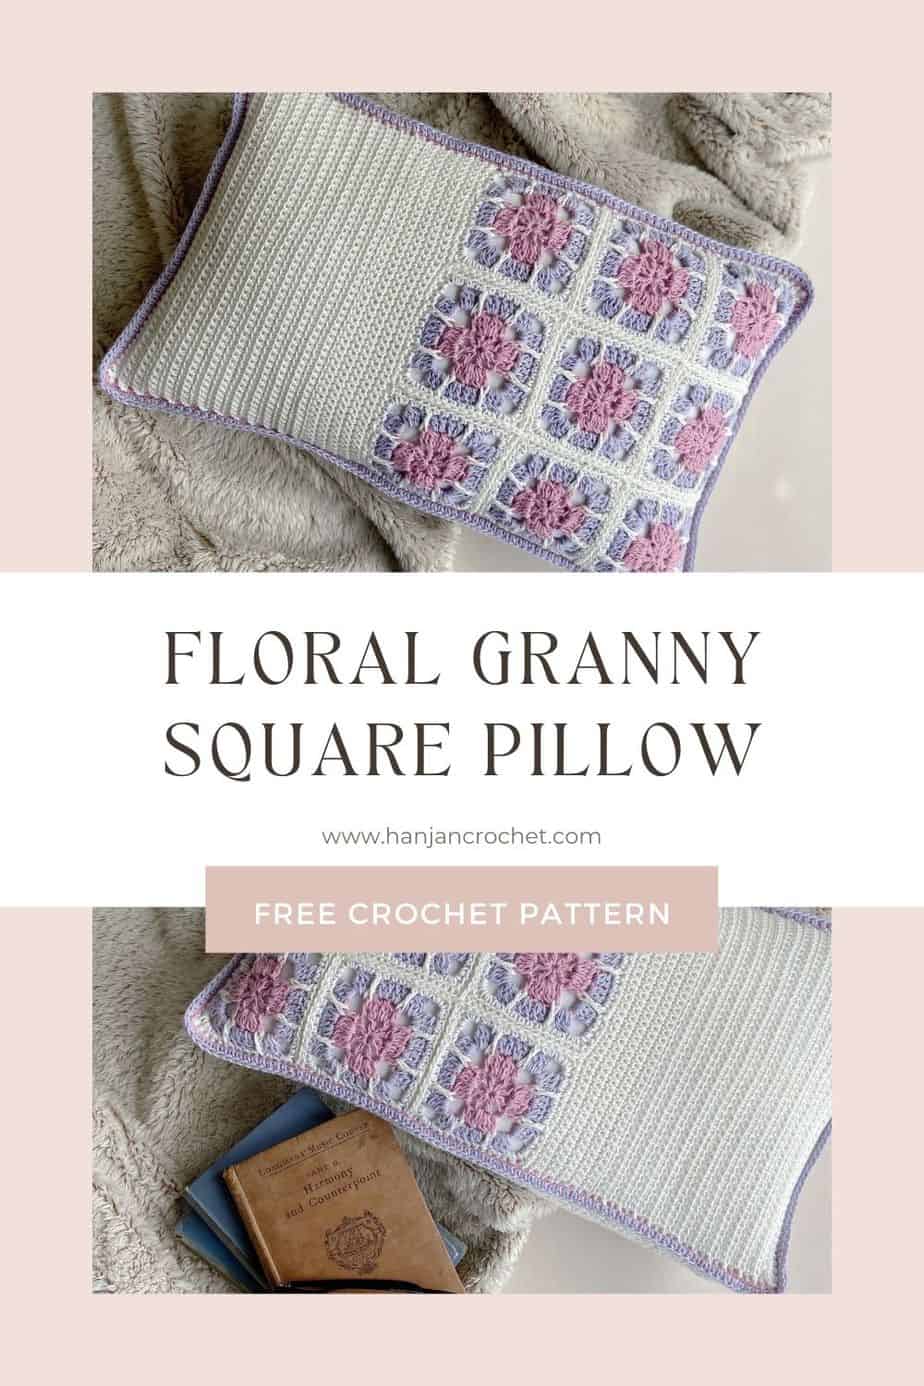 images of floral crochet granny square cushion on fluffy blanket